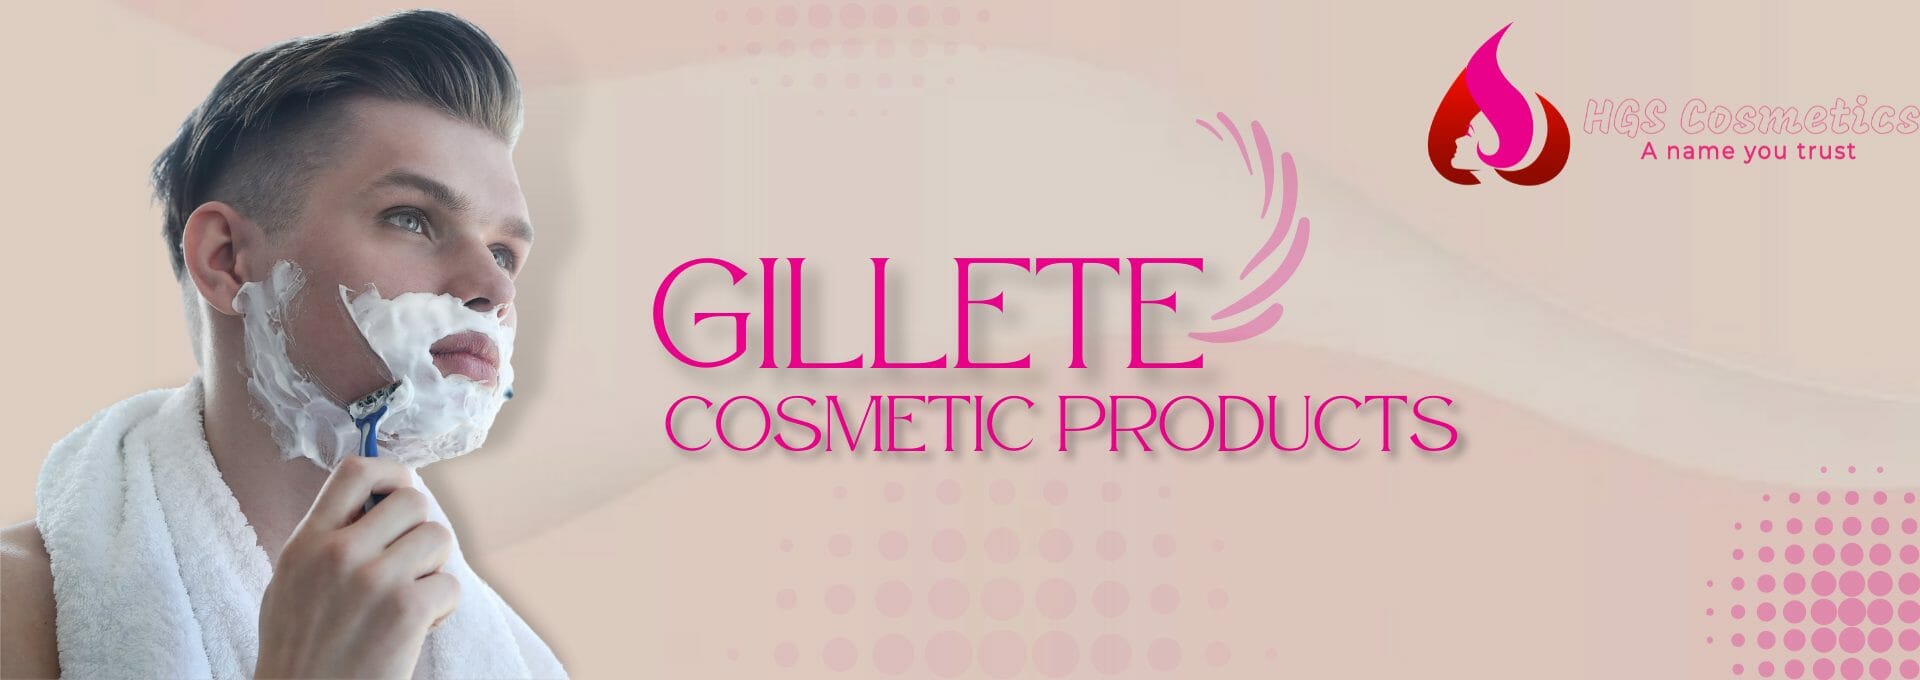 Buy Original Gillette Products Online in Pakistan @ HGS Cosmetics